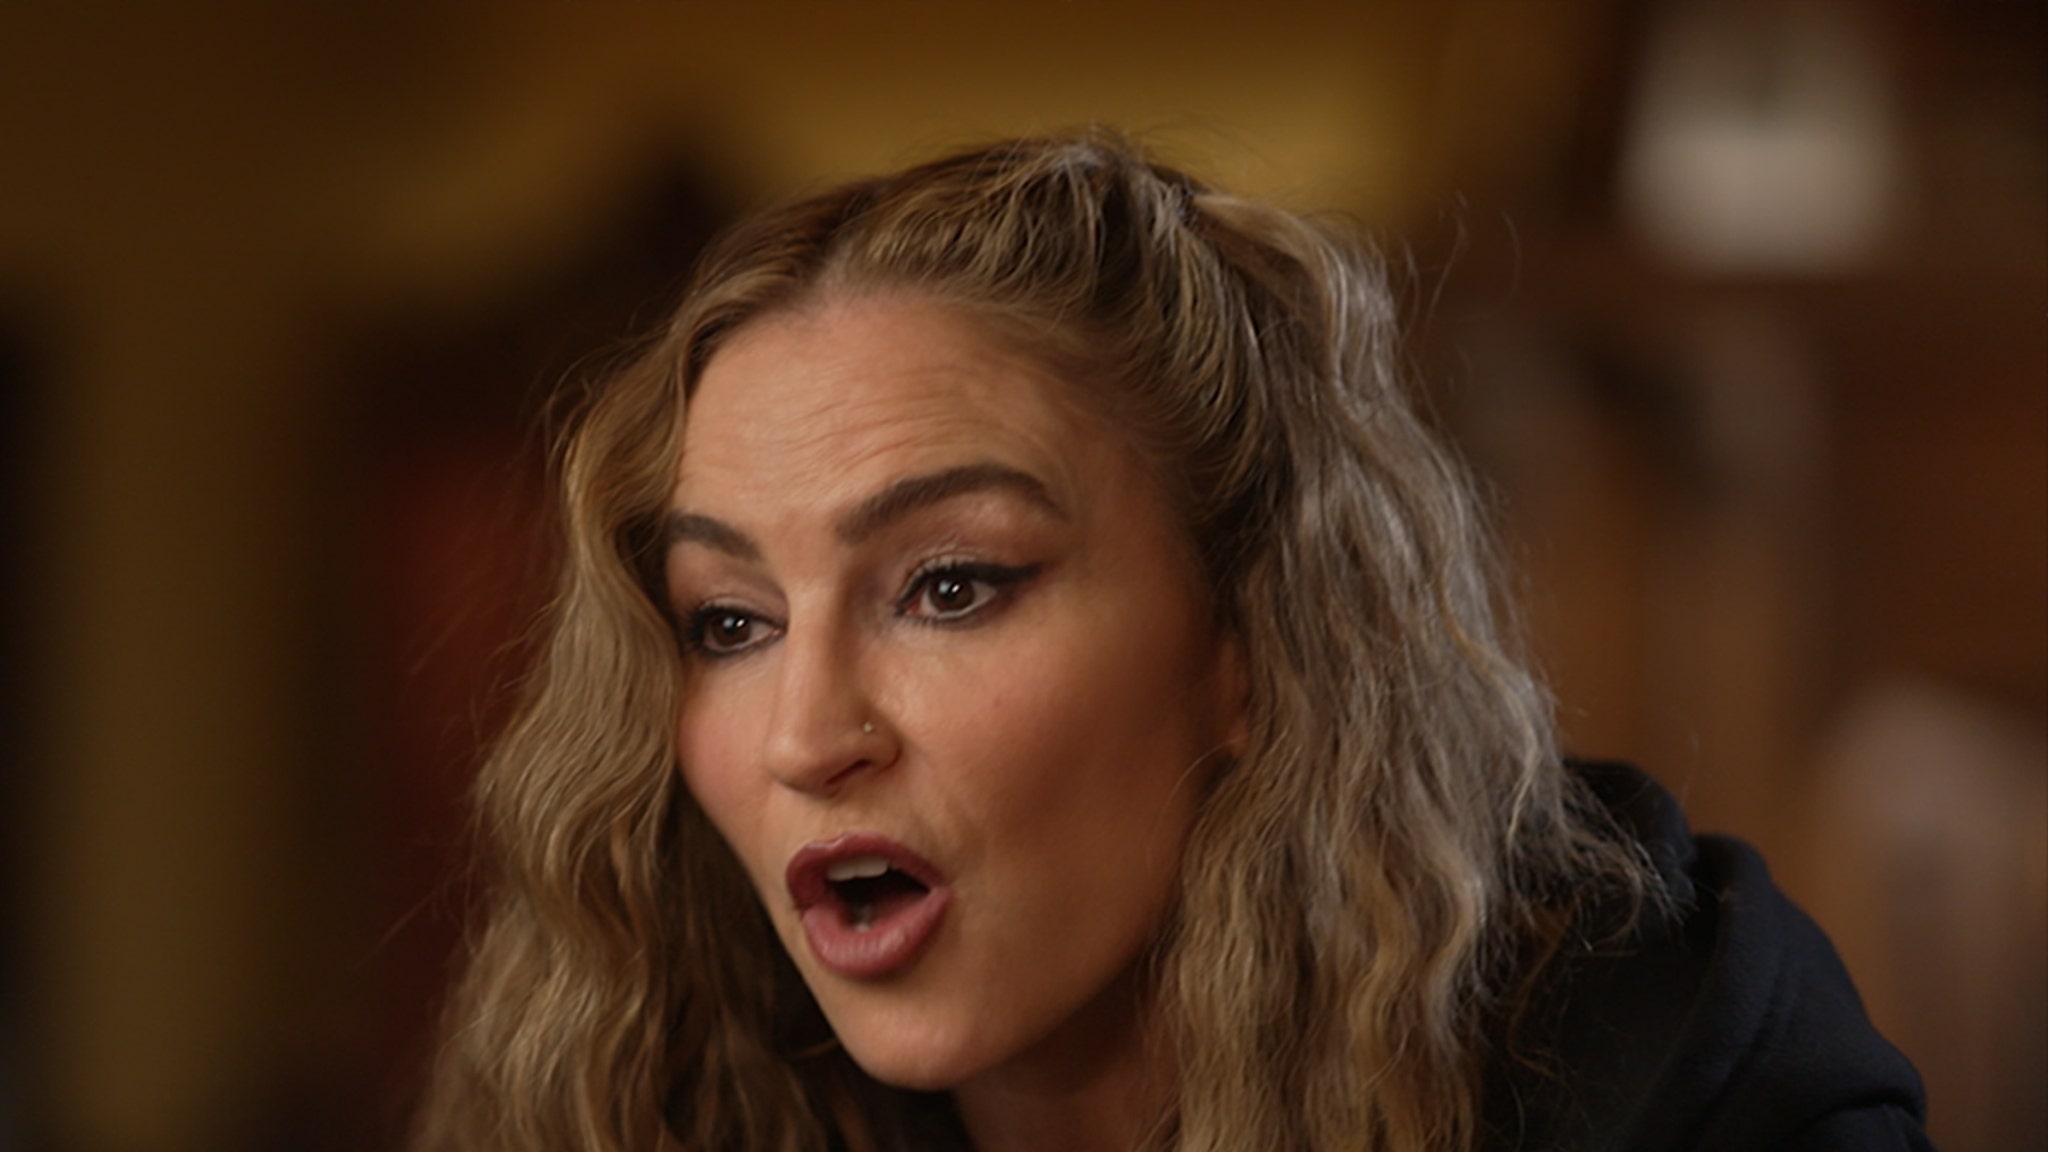 'Sopranos' Star Drea de Matteo Says OnlyFans Gives Her Freedom